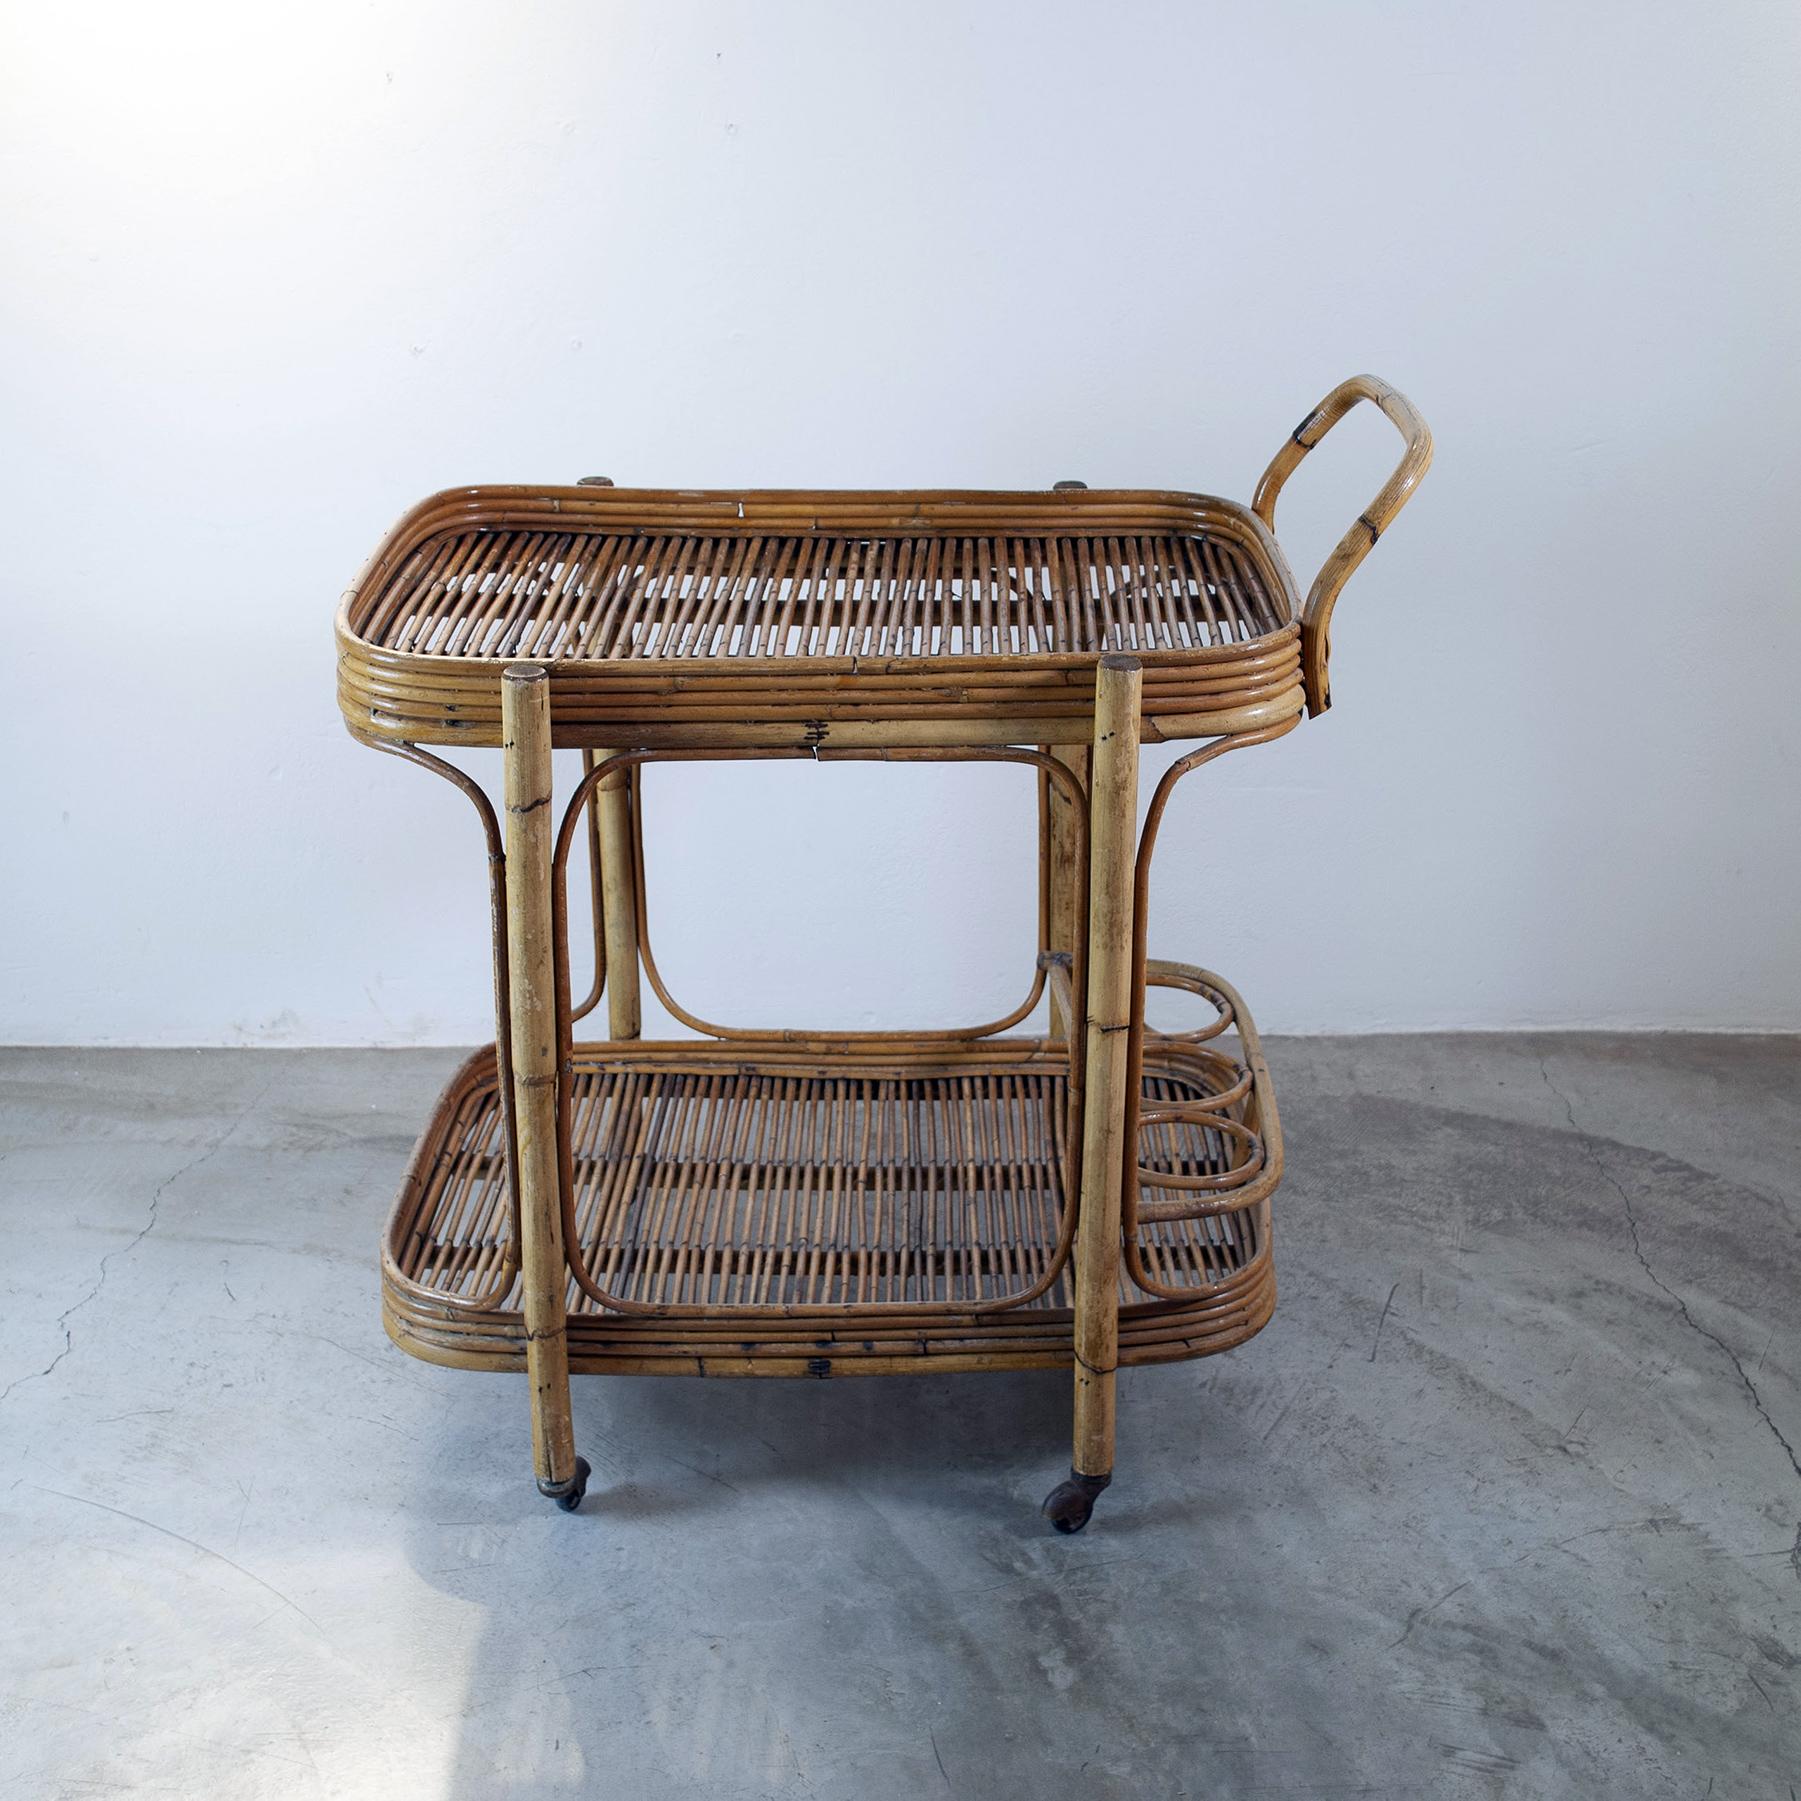 1960s bamboo cane liquor bottle holder trolley in the style of Bonacina production by Tito Agnoli